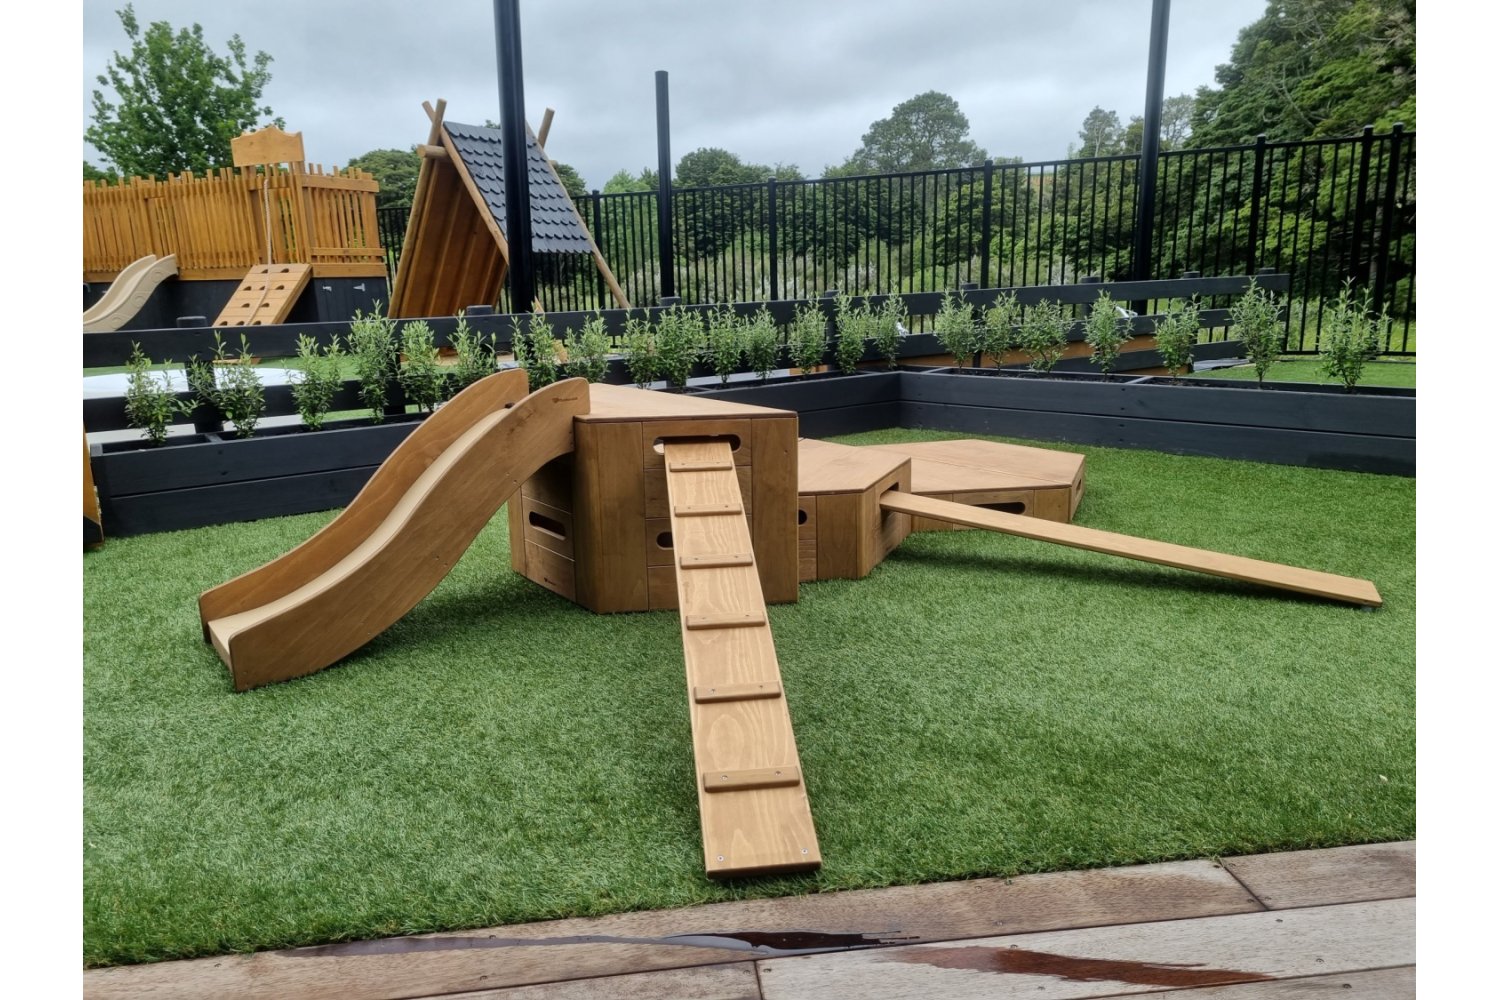 Outdoor movable play set